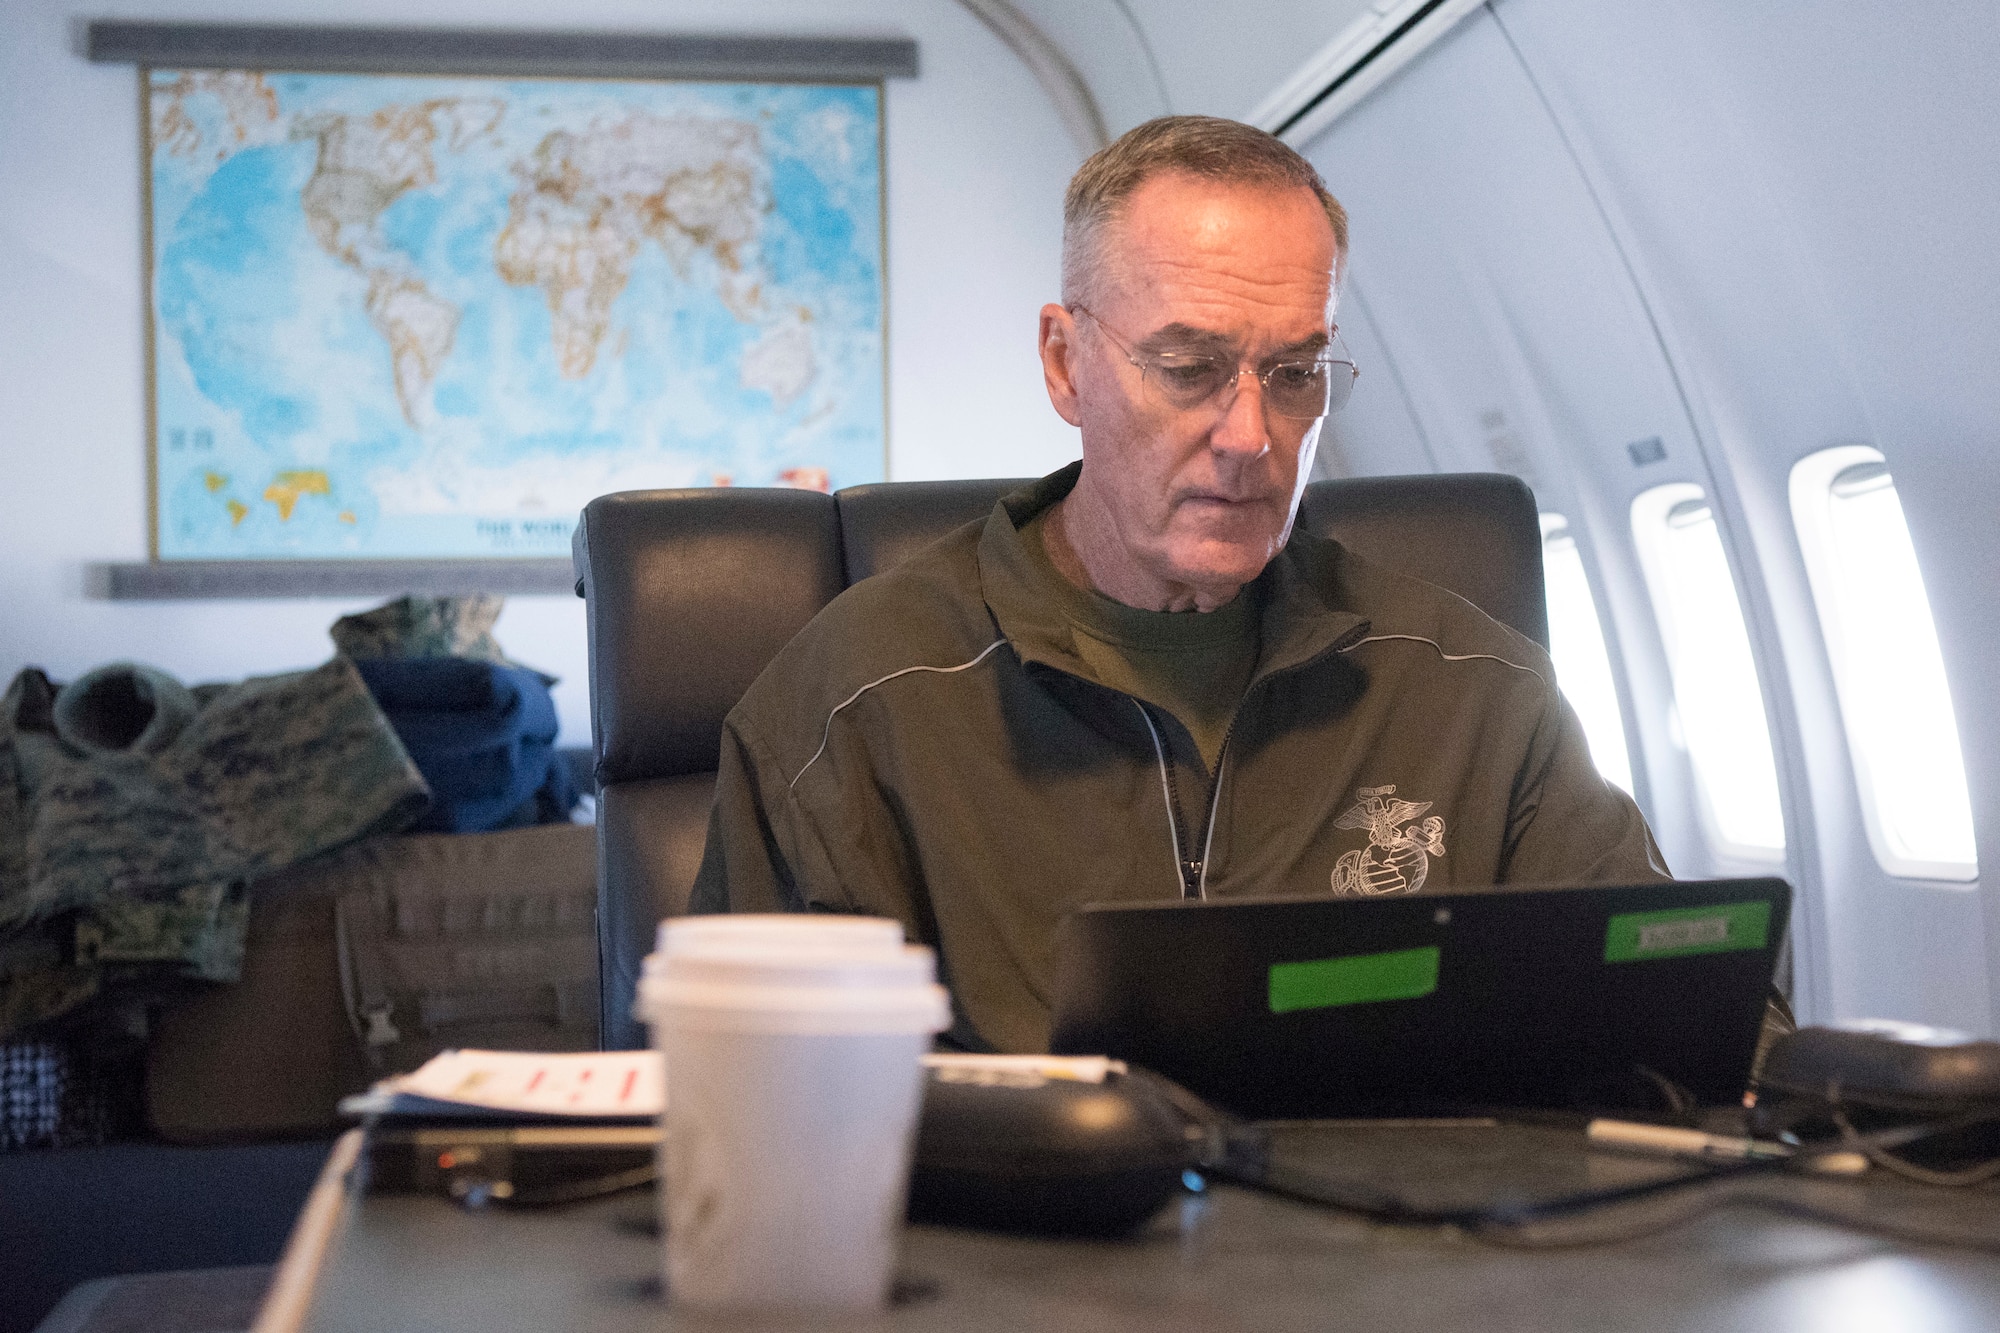 Marine Corps Gen. Joseph F. Dunford Jr., chairman of the Joint Chiefs of Staff, works in his cabin aboard a C-32 aircraft after departing Fort Greeley, Alaska, Aug. 19, 2017. (DOD photo by U.S. Navy Petty Officer 1st Class Dominique A. Pineiro)